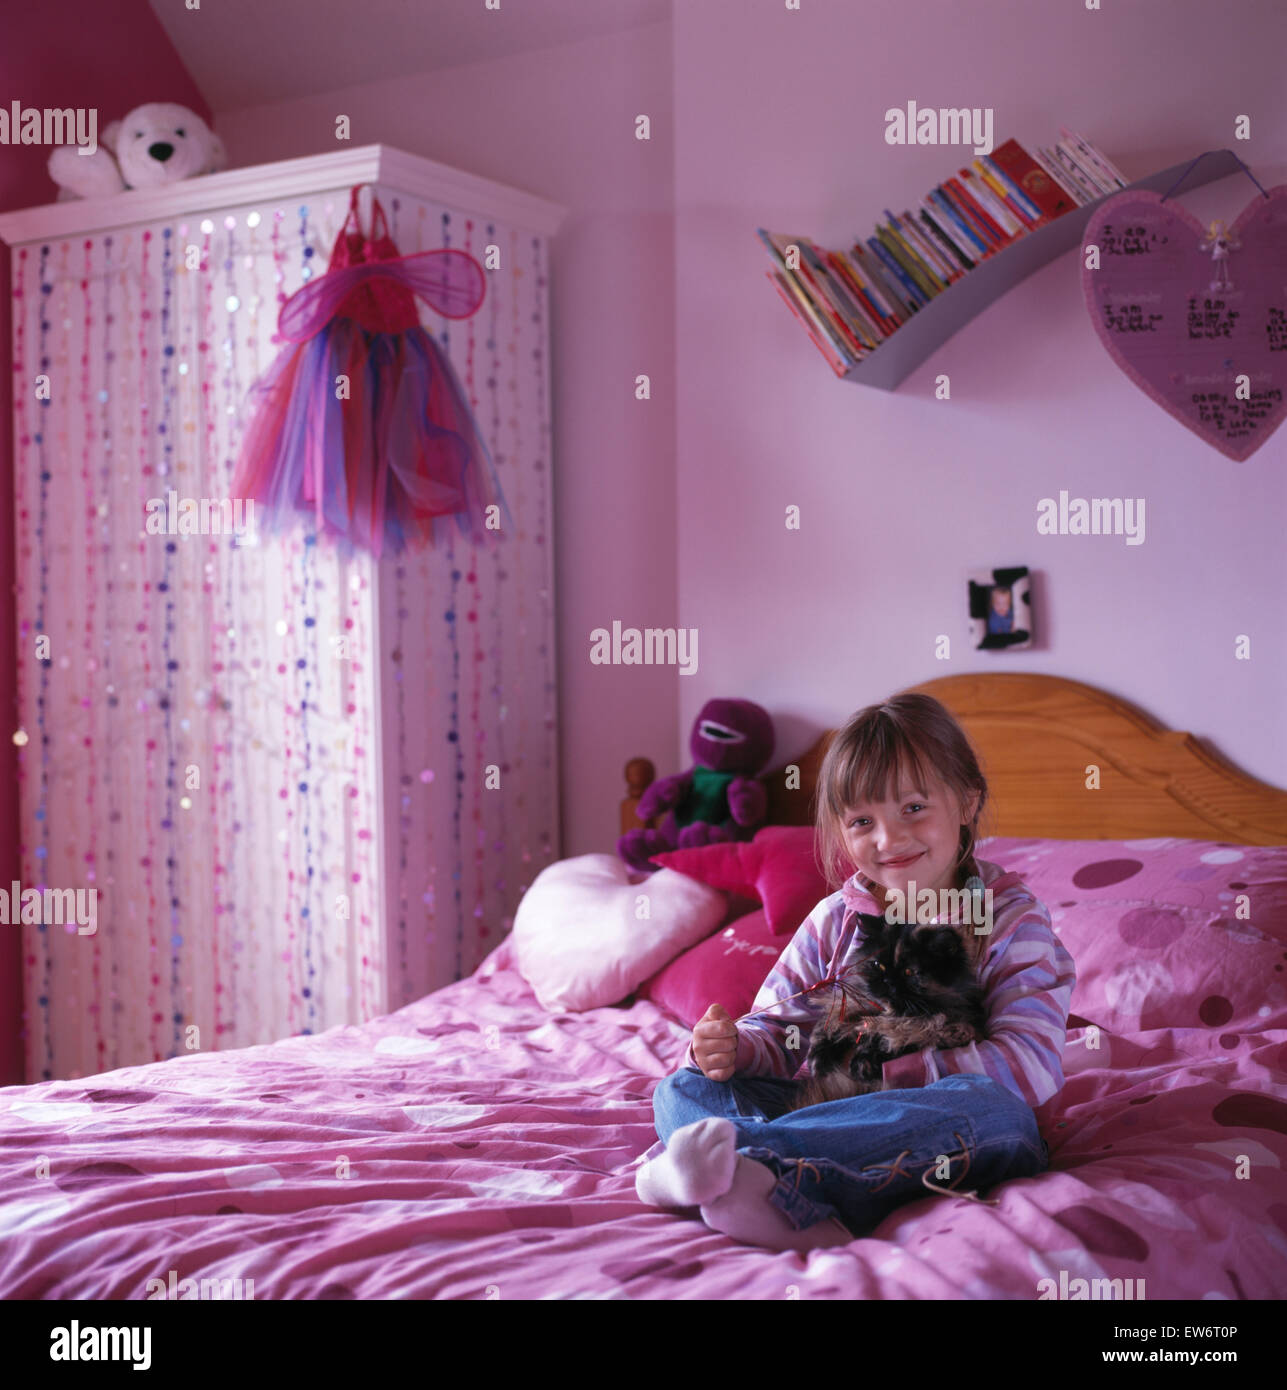 Small girl sitting on bed in child's pink nineties bedroom Stock Photo